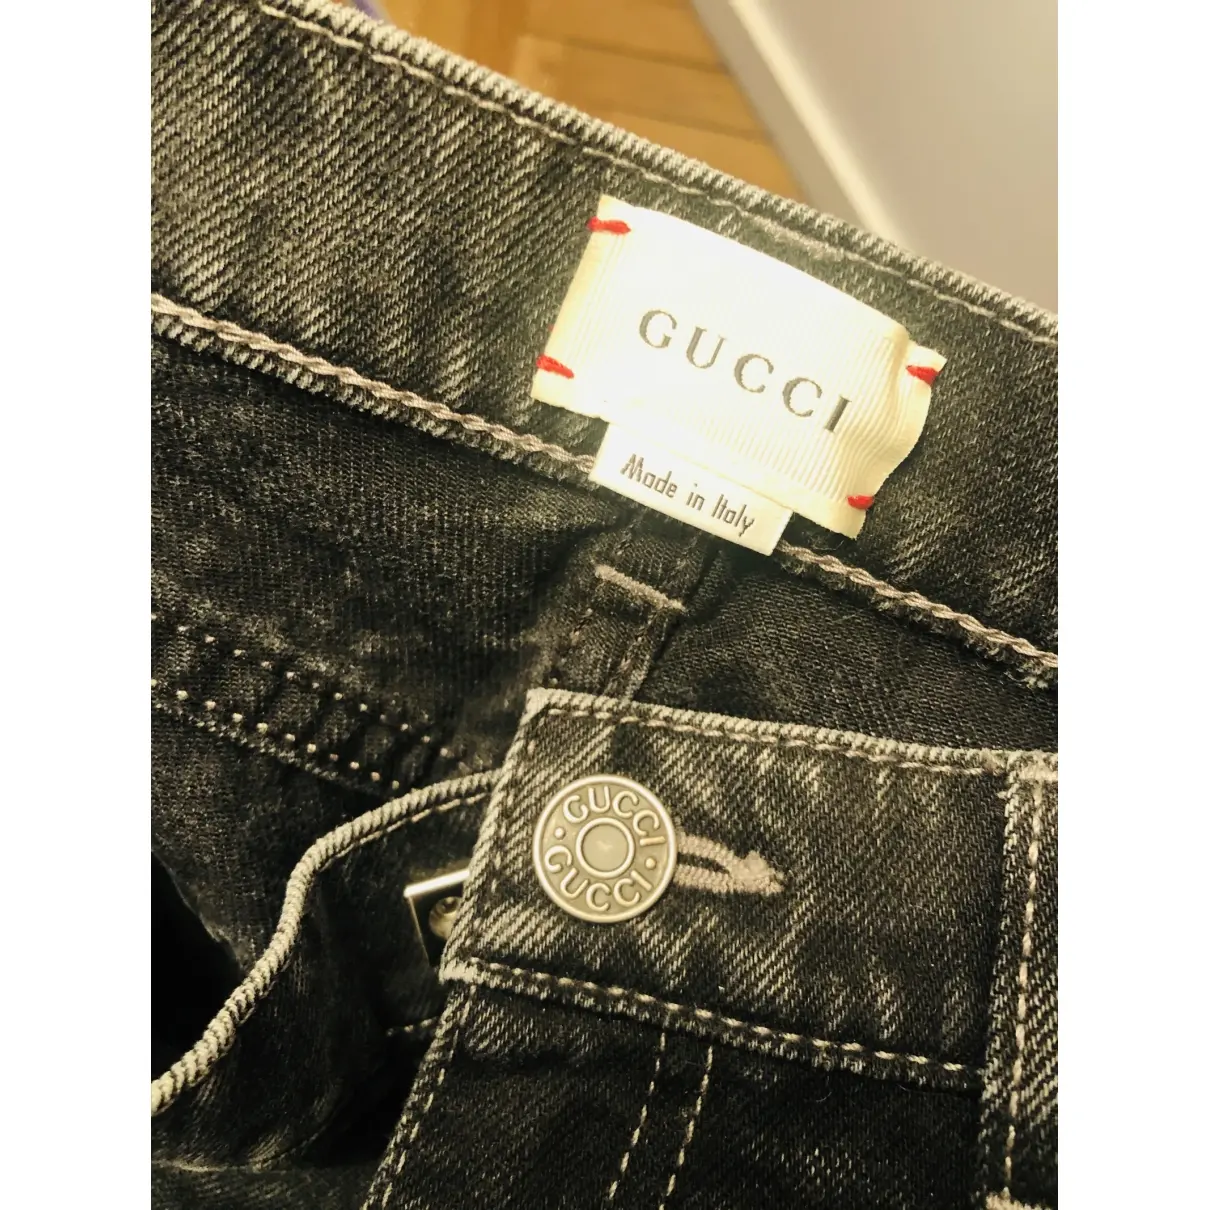 Gucci Grey Denim - Jeans Trousers for sale